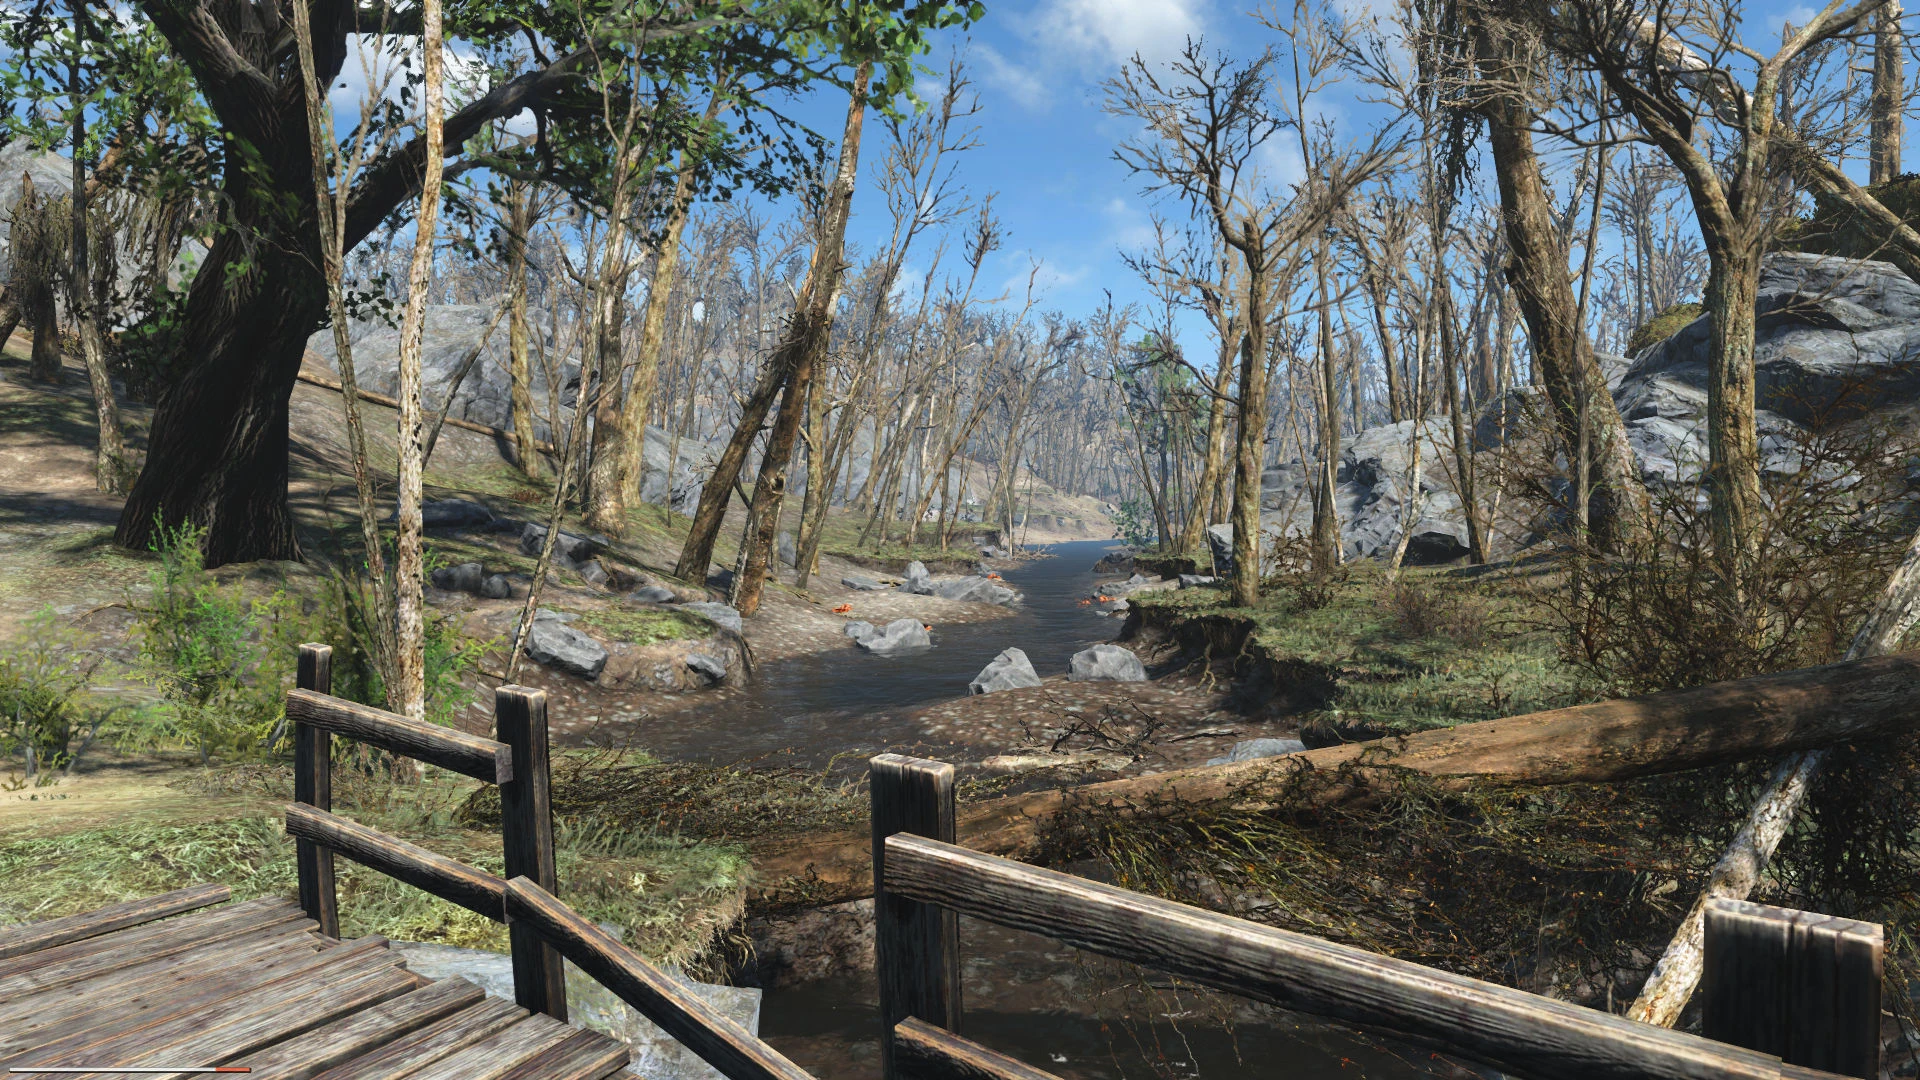 best grass and tree mods for xbox one fallout 4